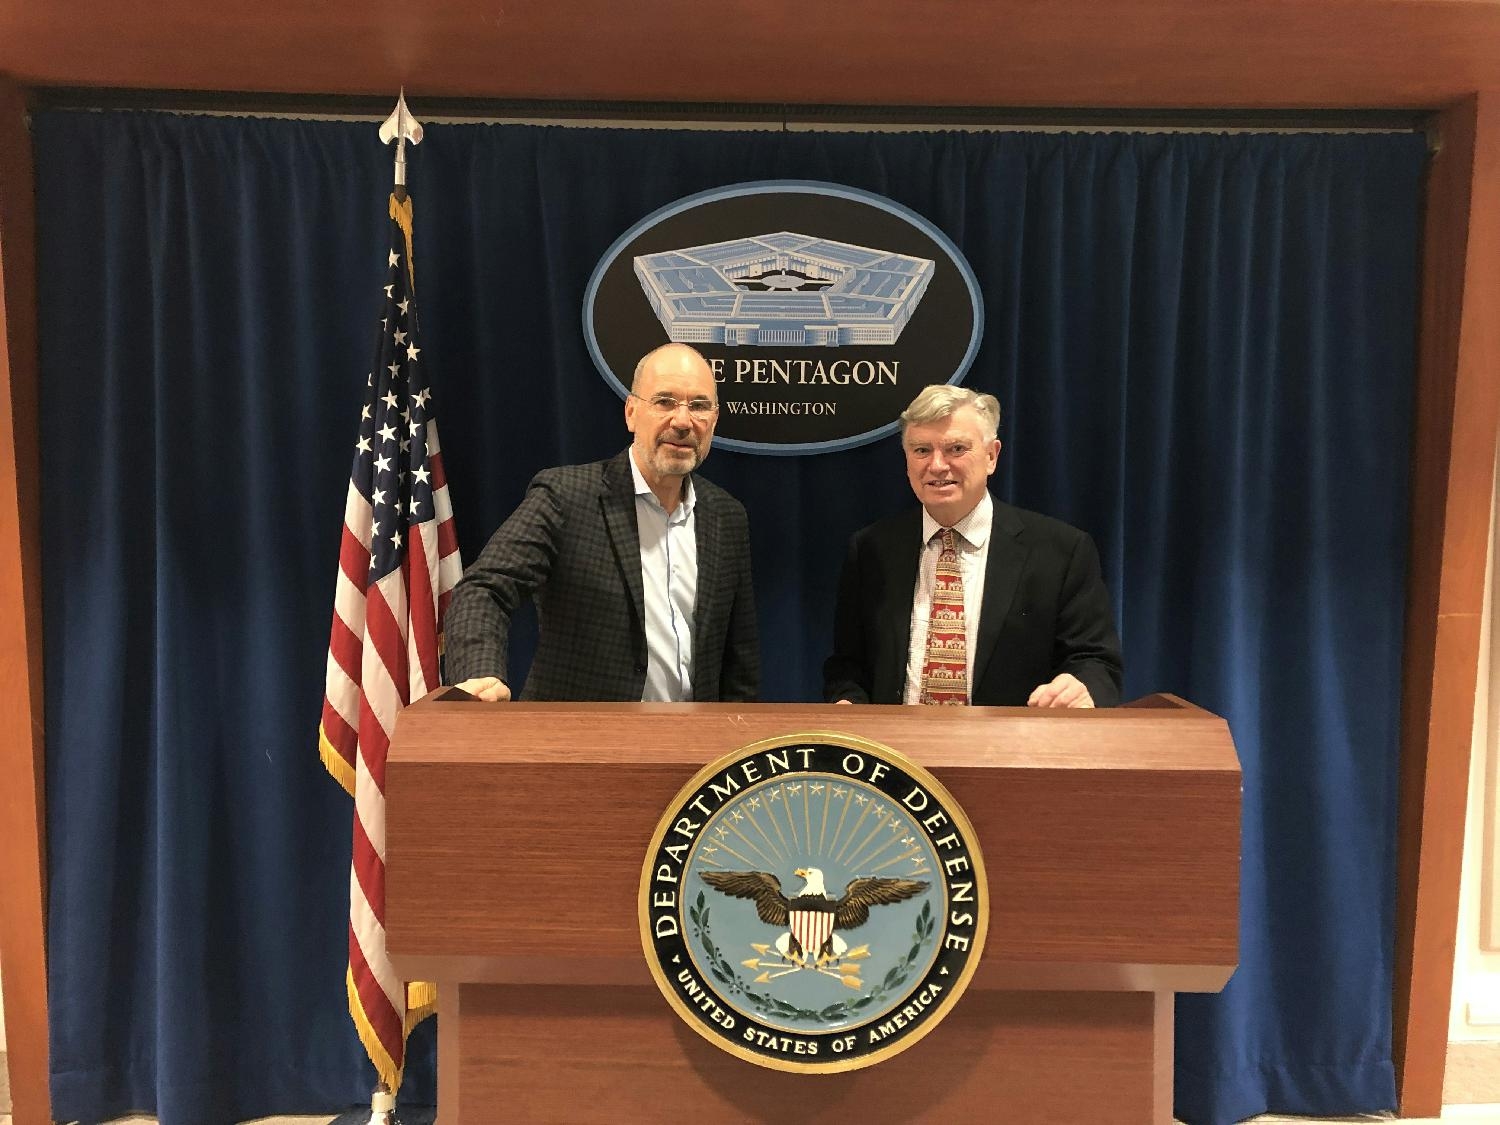 LOCATORX CEO AND OUR ADVISORY BOARD MEMBER (INAUGURAL HOLDER, CHAIR OF NANOMATERIALS, UNIV. OF OXFORD) AT THE PENTAGON